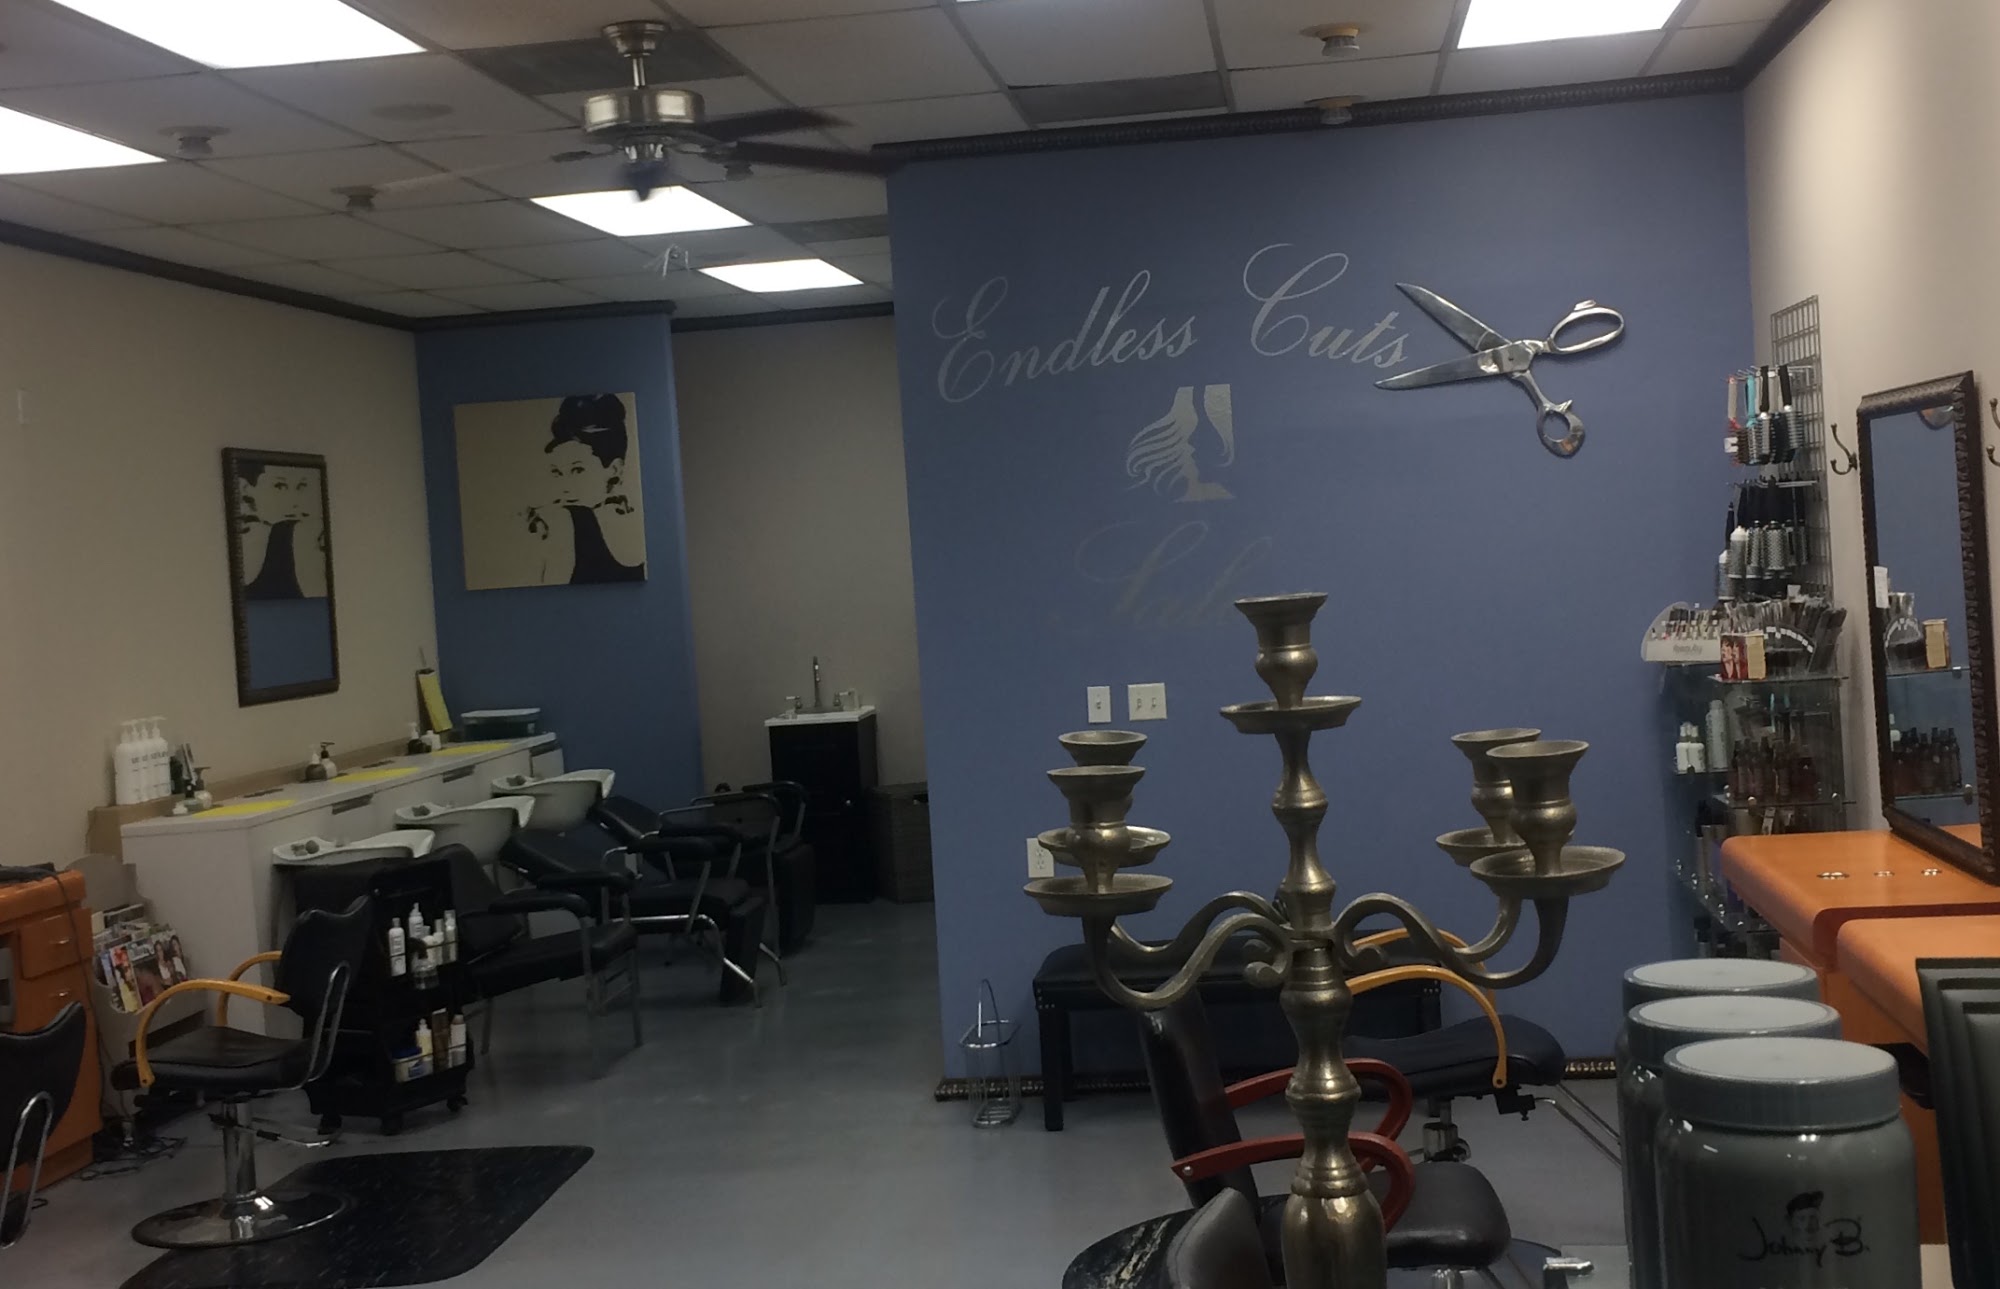 Endless Cuts Salon and Blow-Out Bar